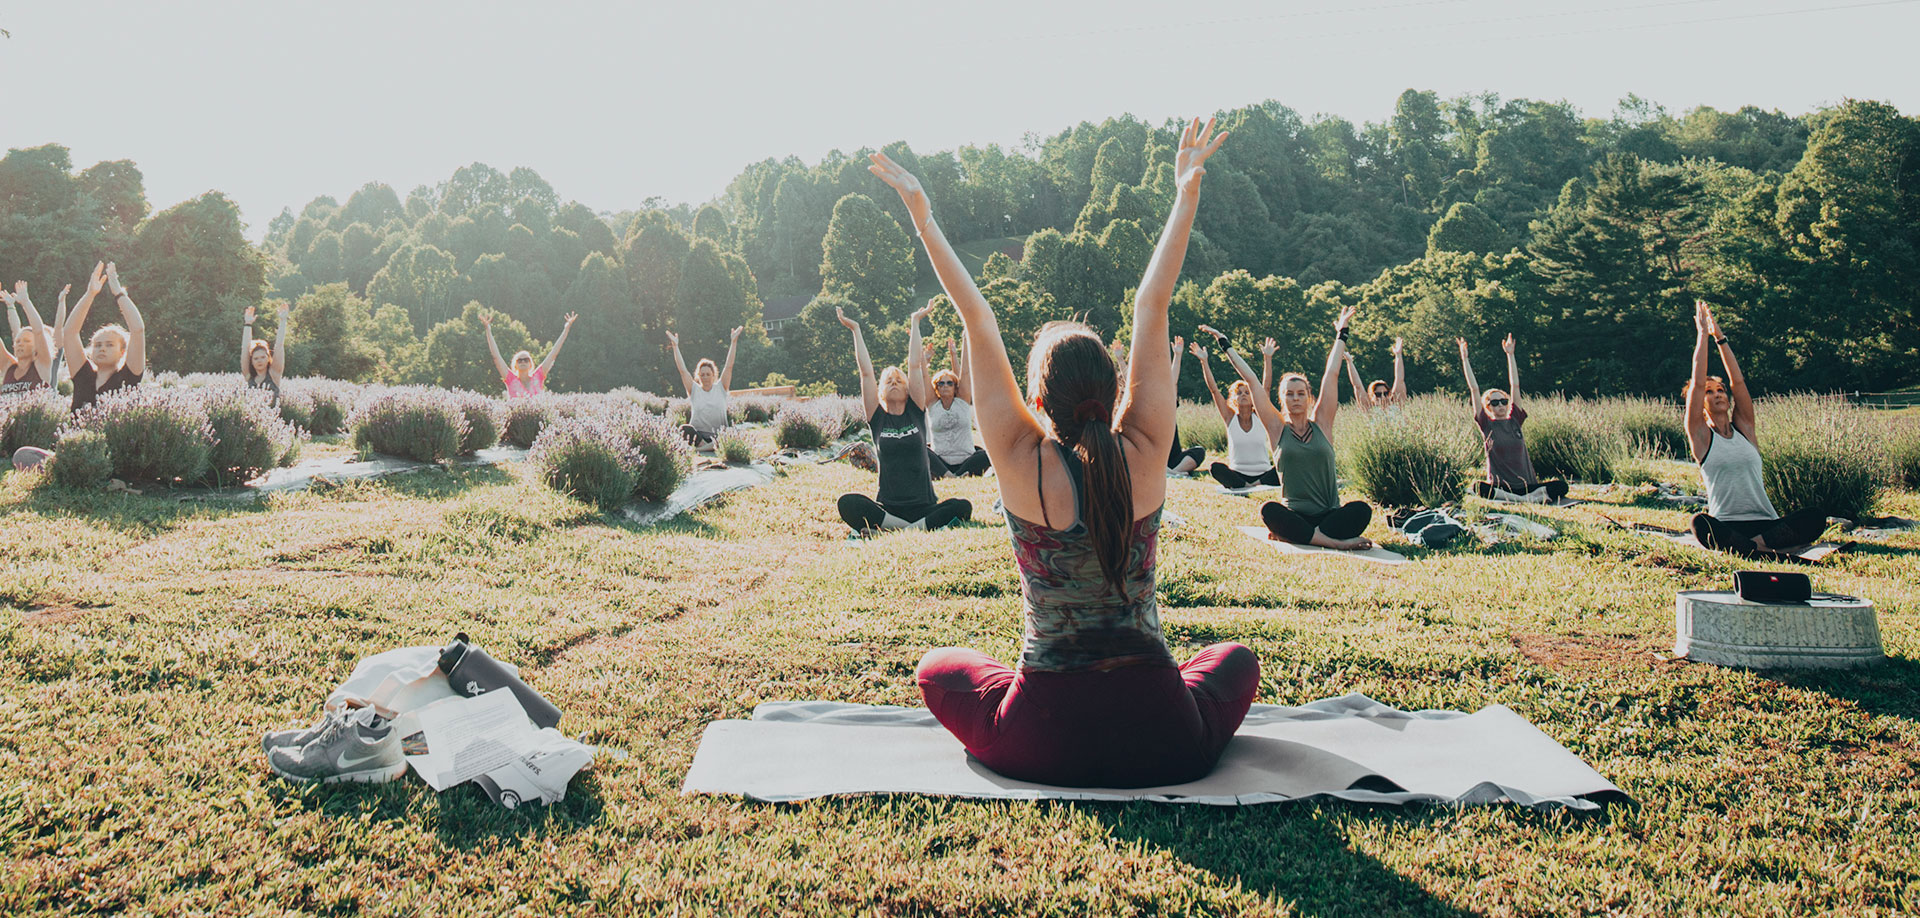 Yoga in a meadow.